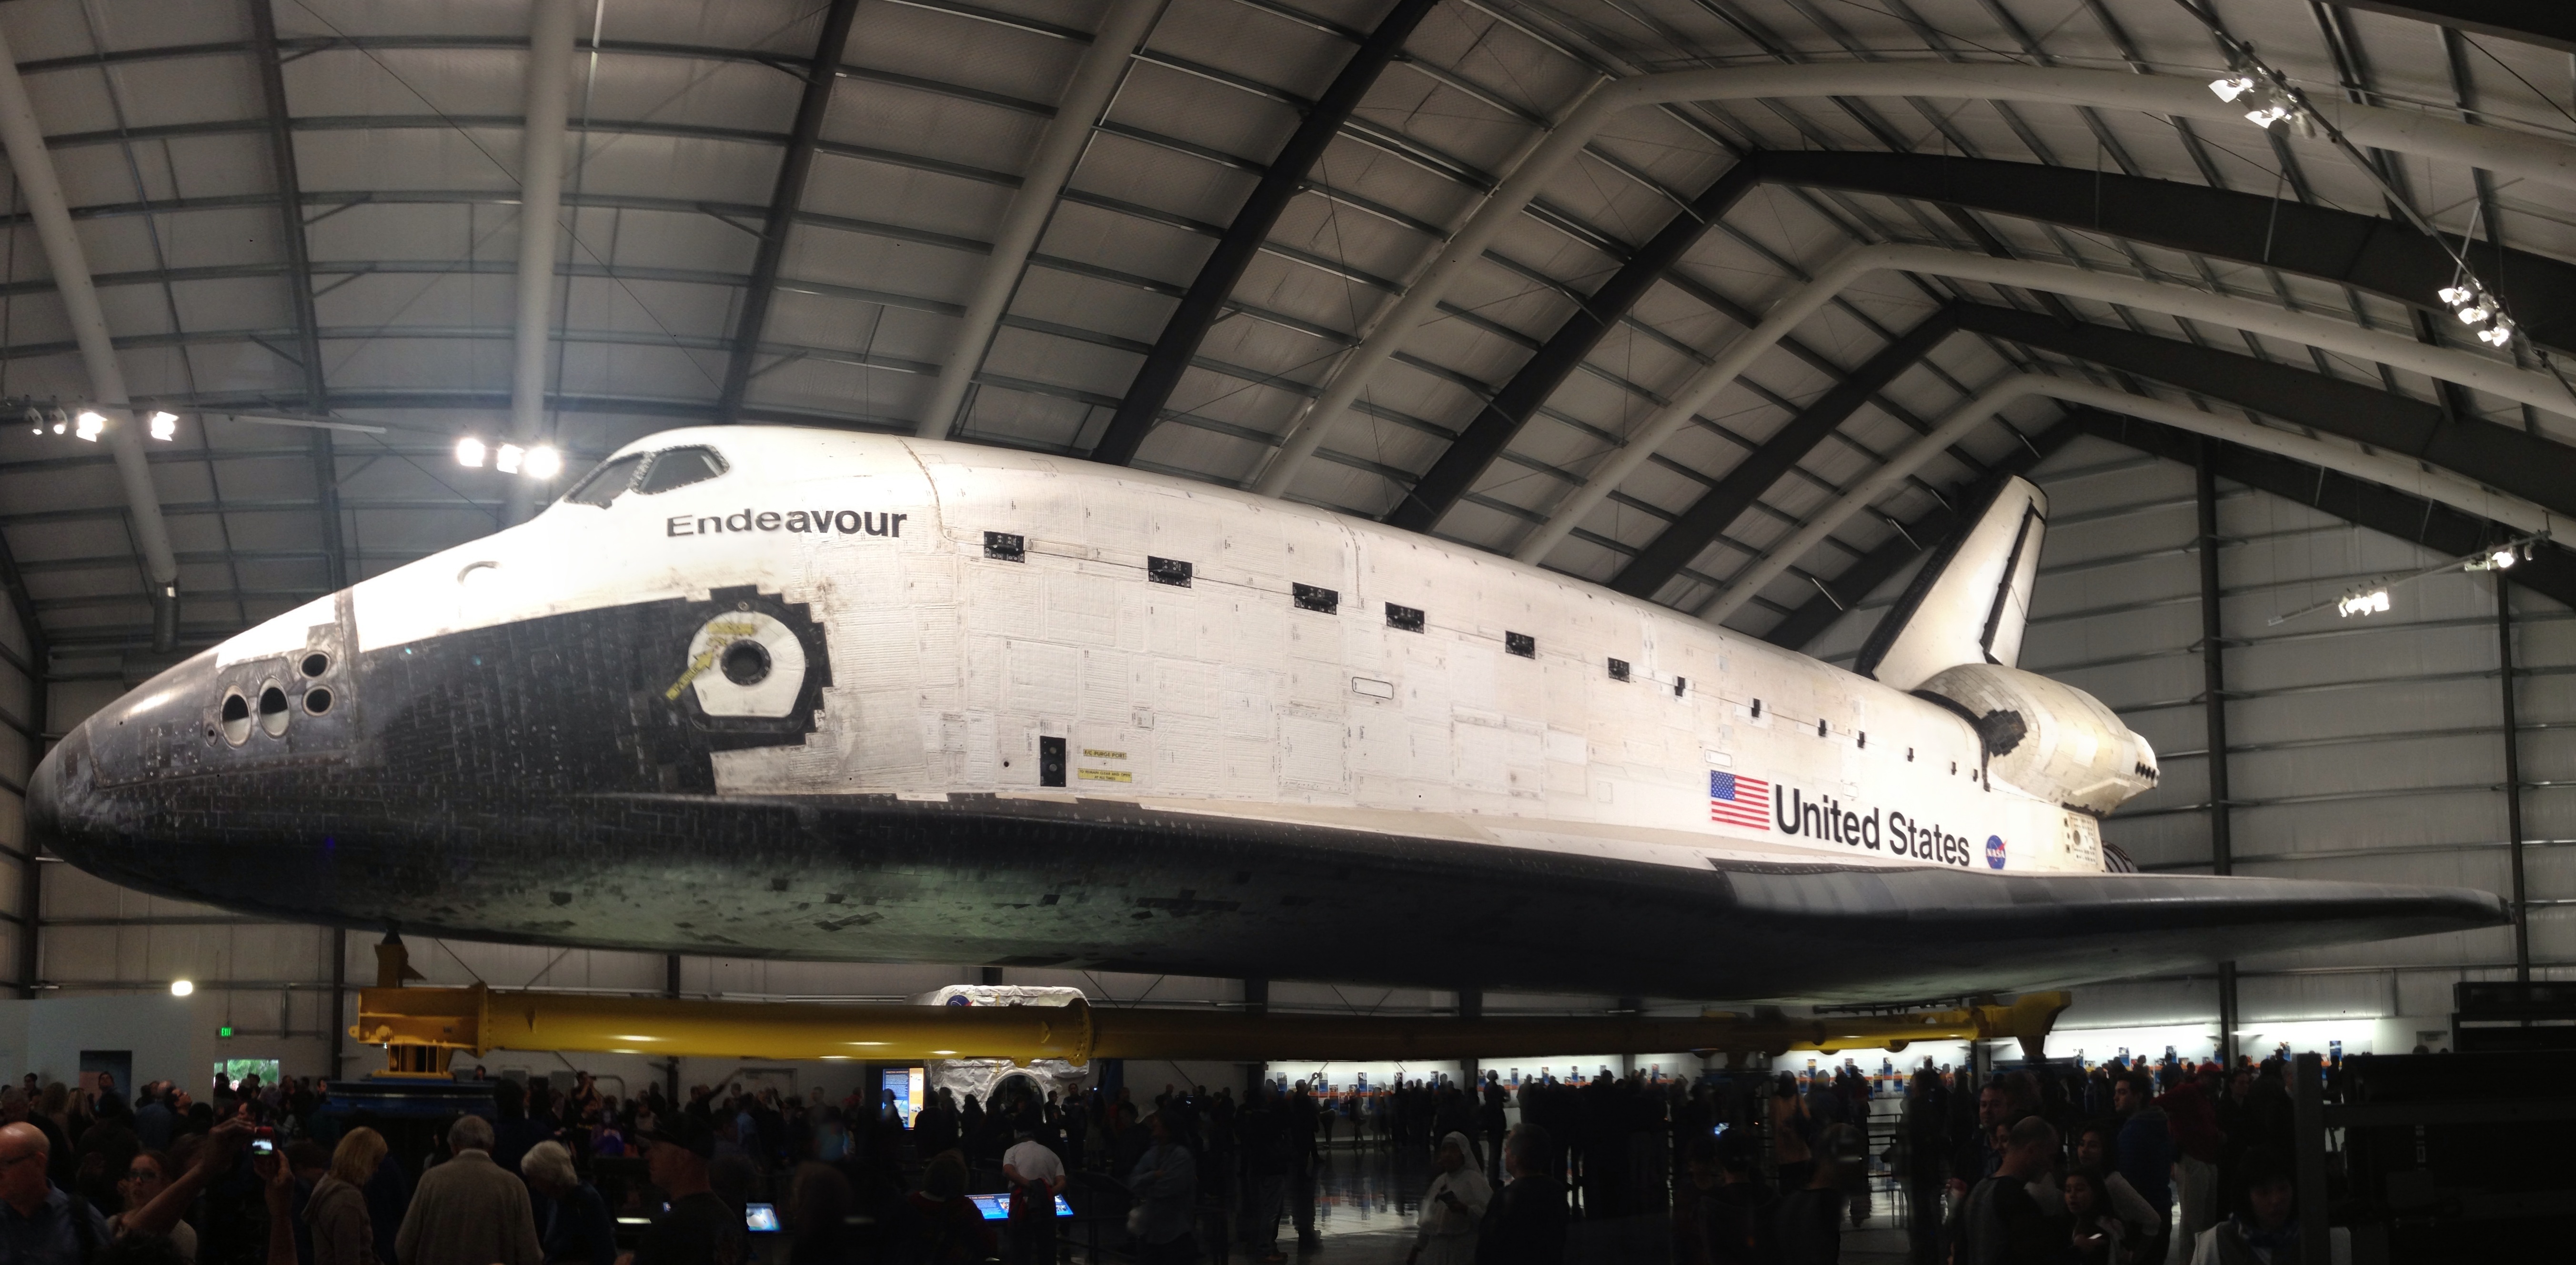 endeavour at california science center